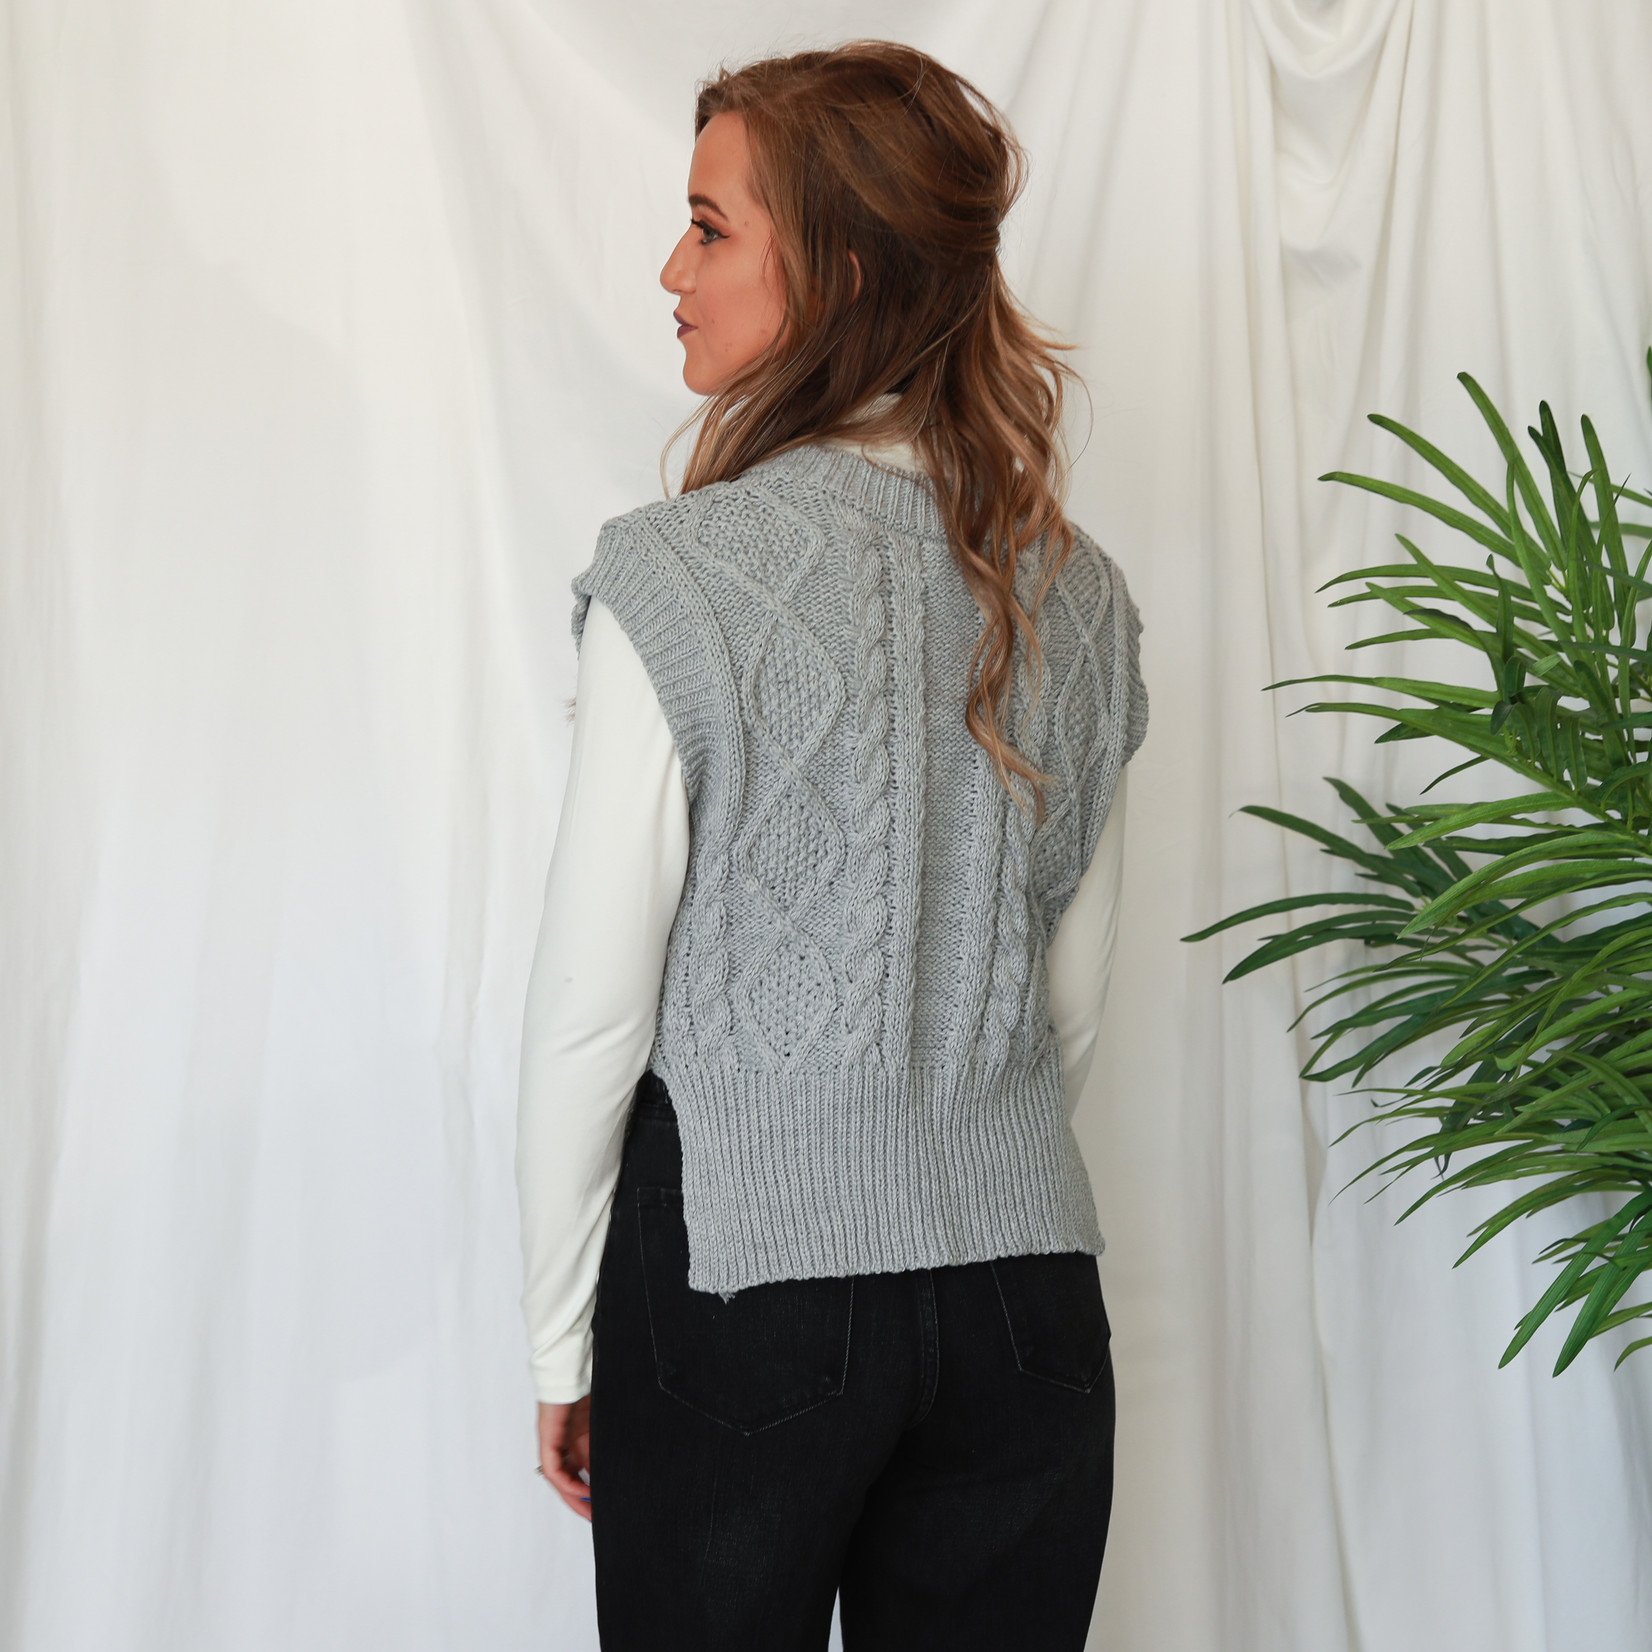 Tivia cable knit sweater vest